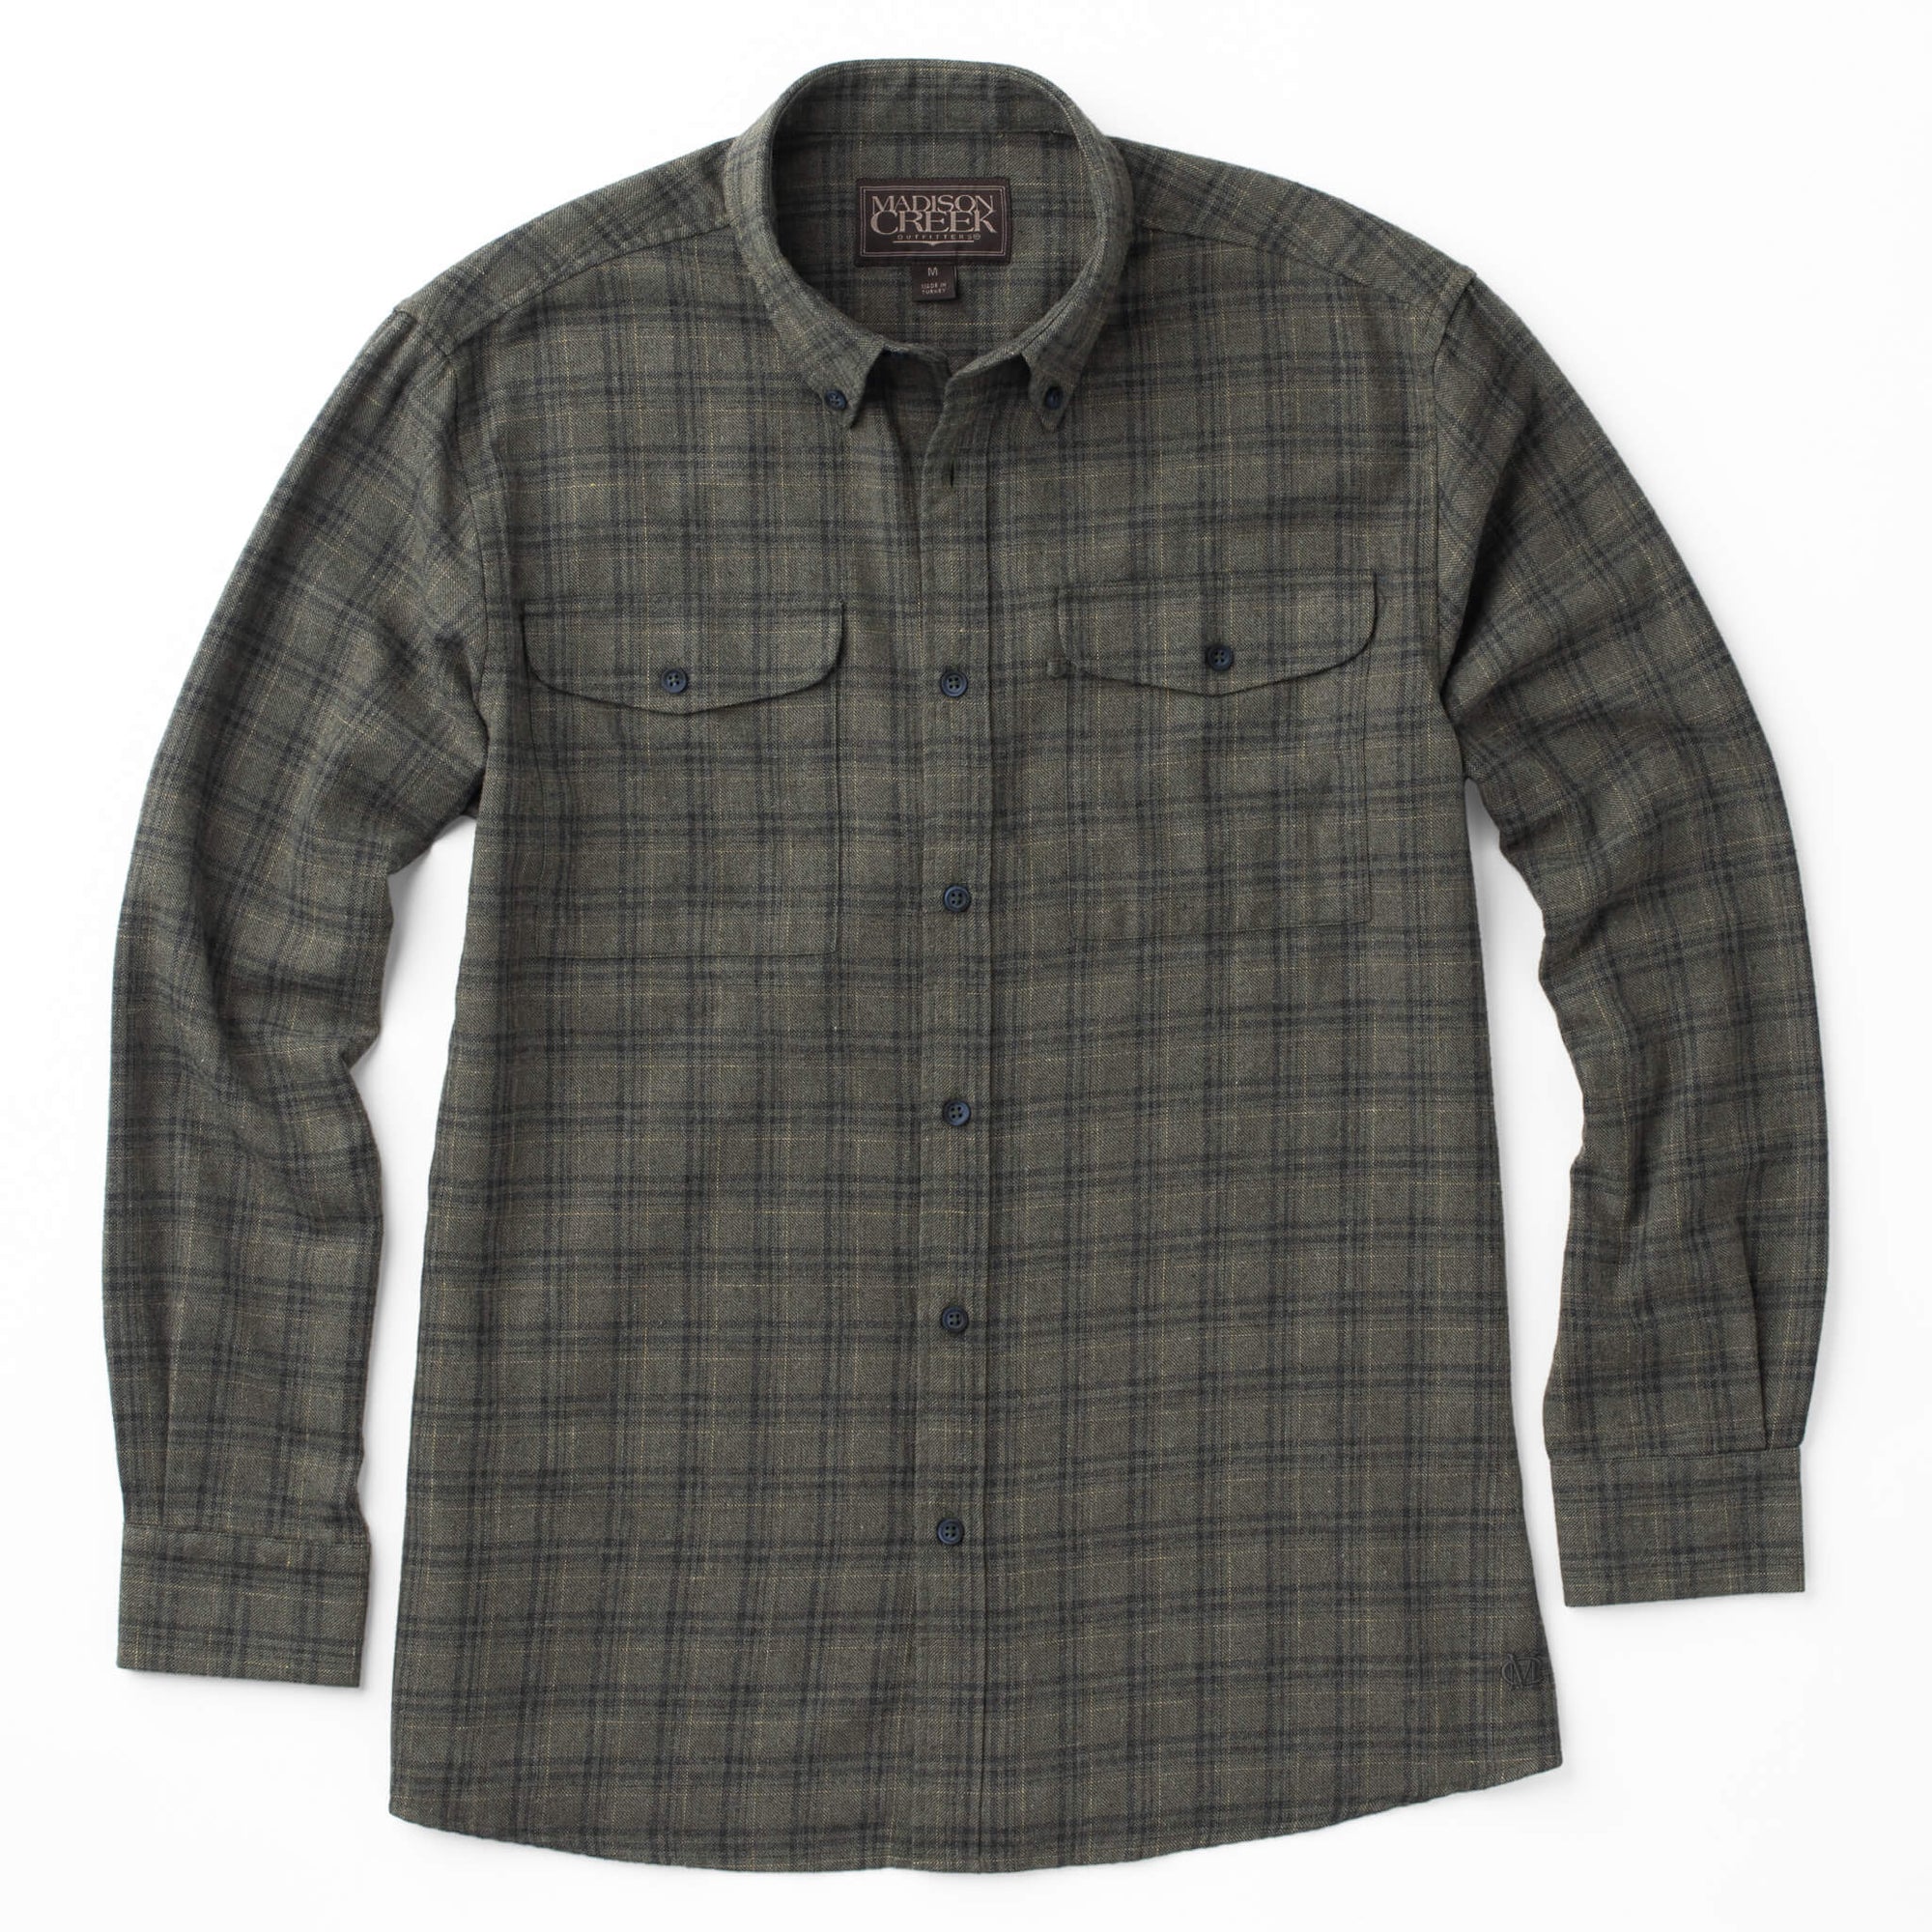 Men's Shirts  Madison Creek Outfitters